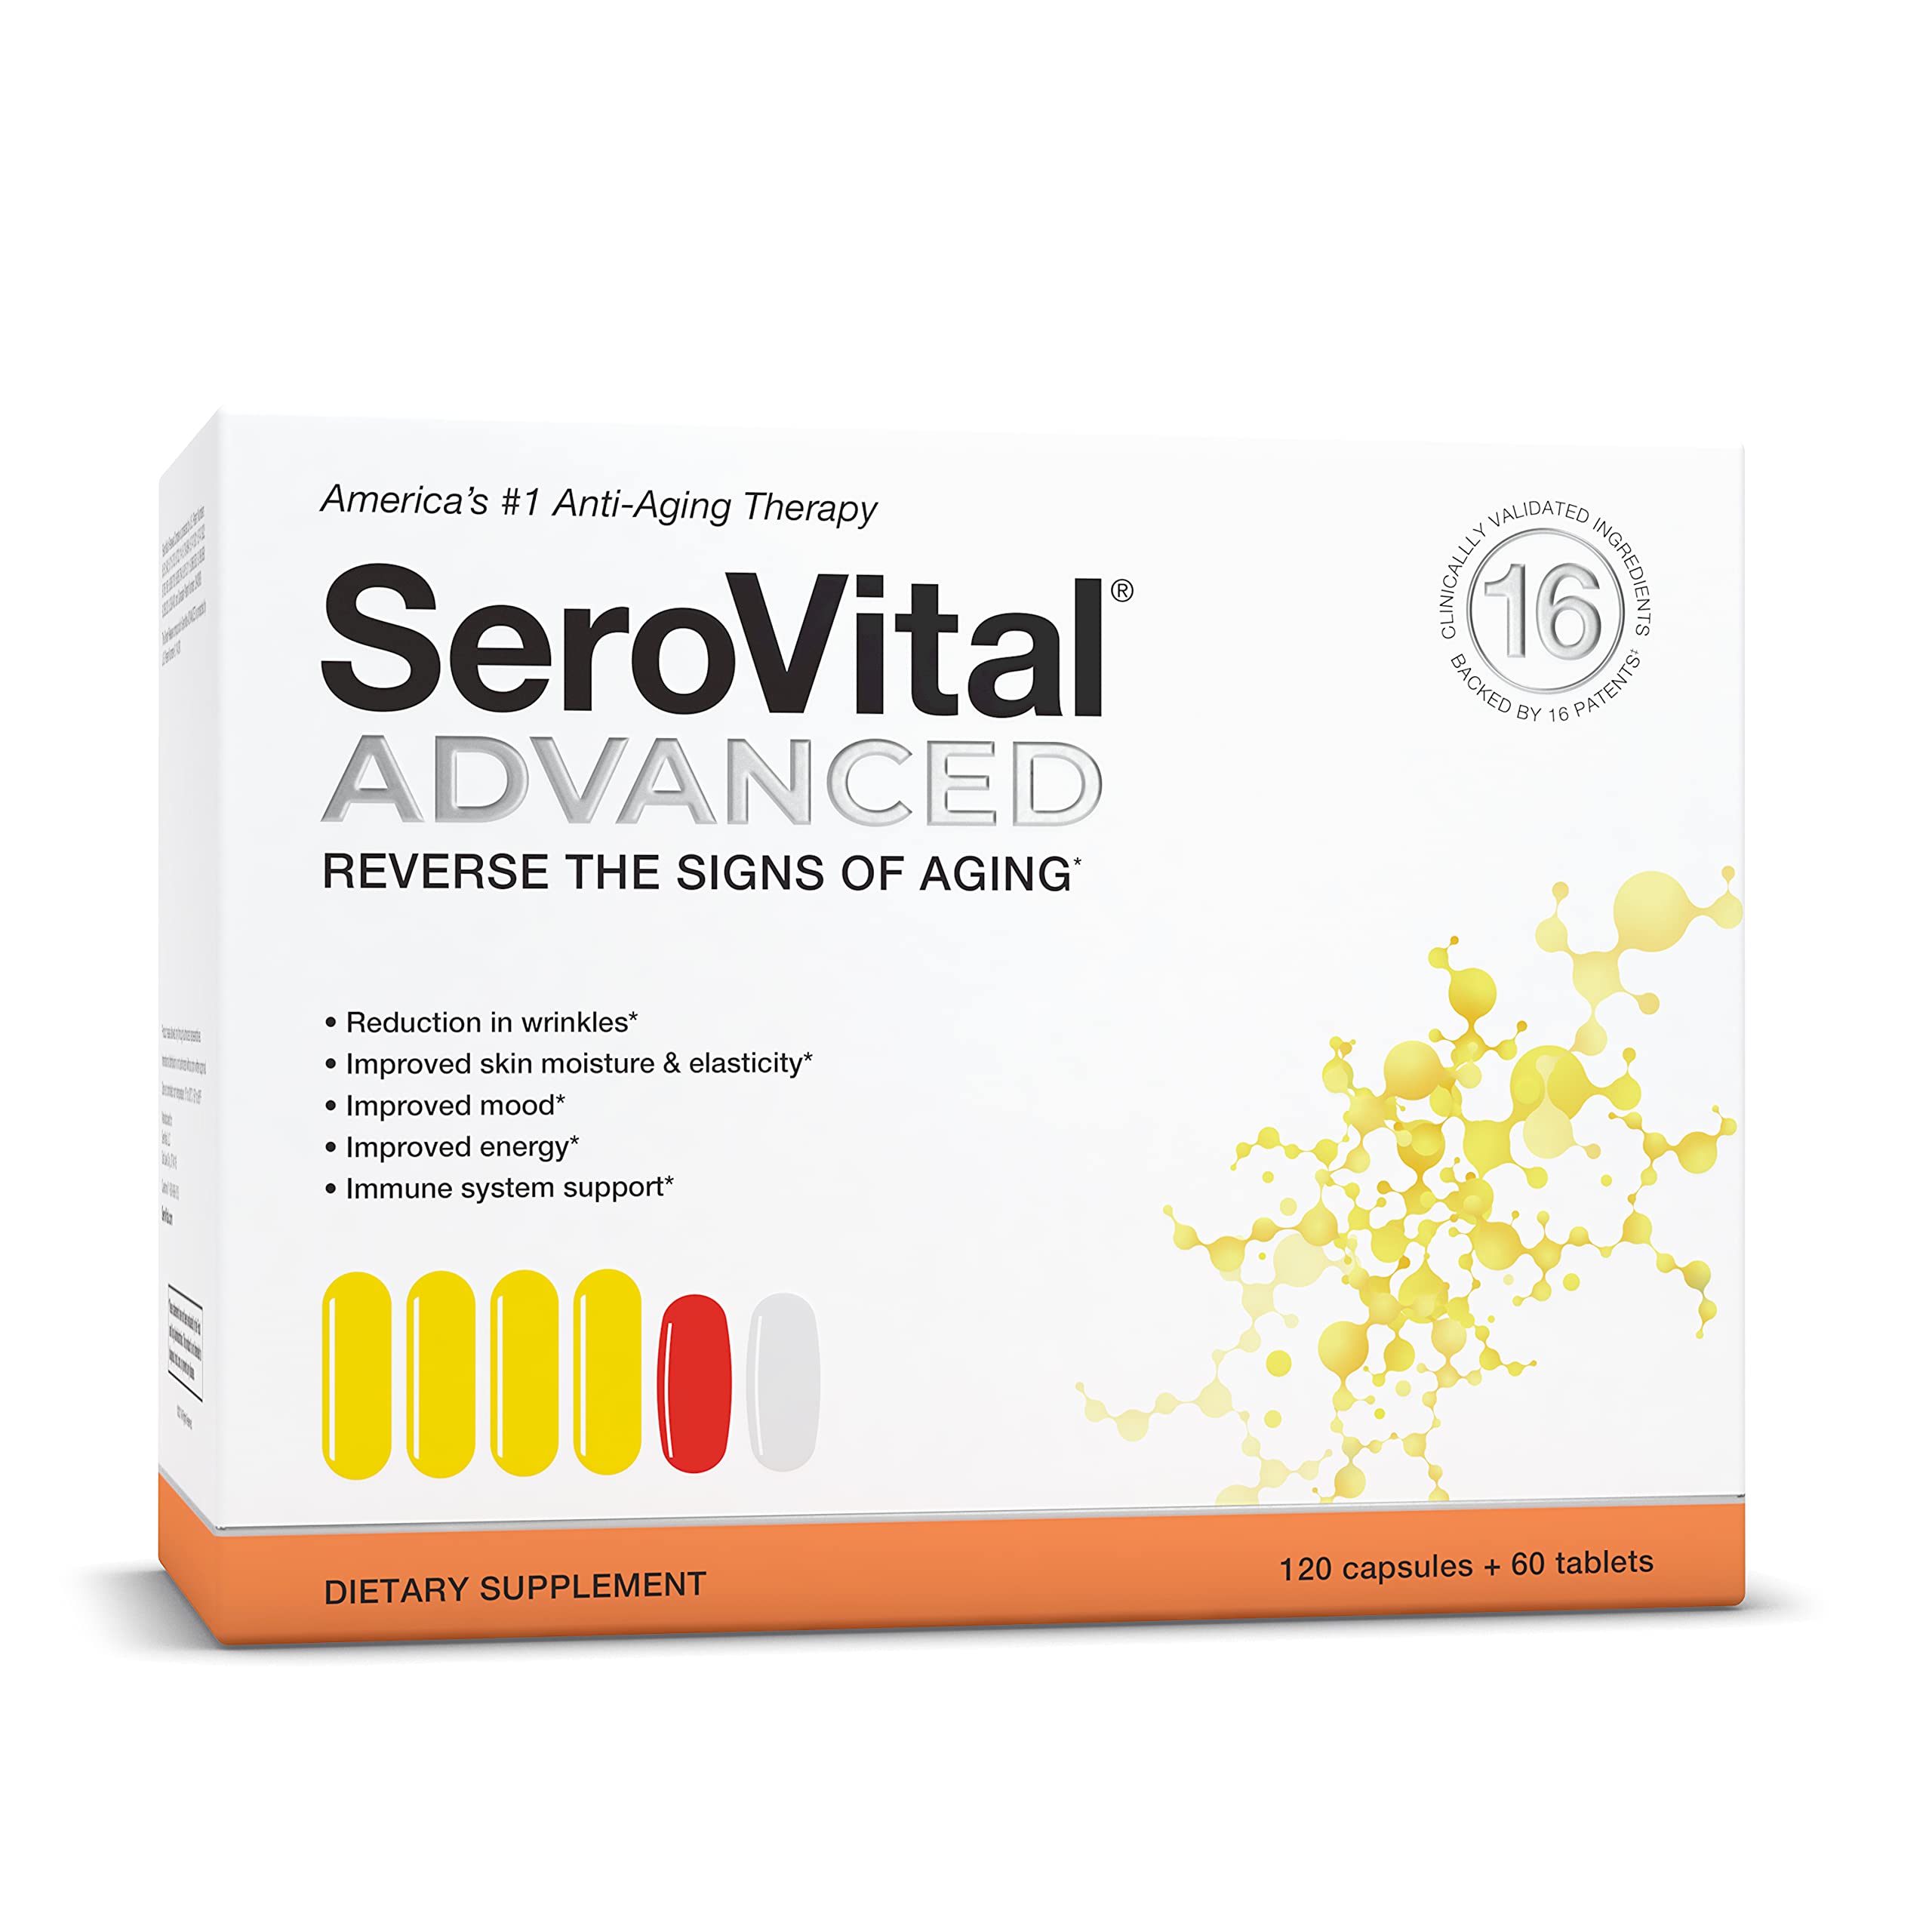 Serovital Advanced for Women - Anti-Aging Supplement for Women - Increase a Critical Peptide Associated with Stimulating Collagen Production, Skin Benefits, Energy, Immune Support, and Sleep - 30-Day